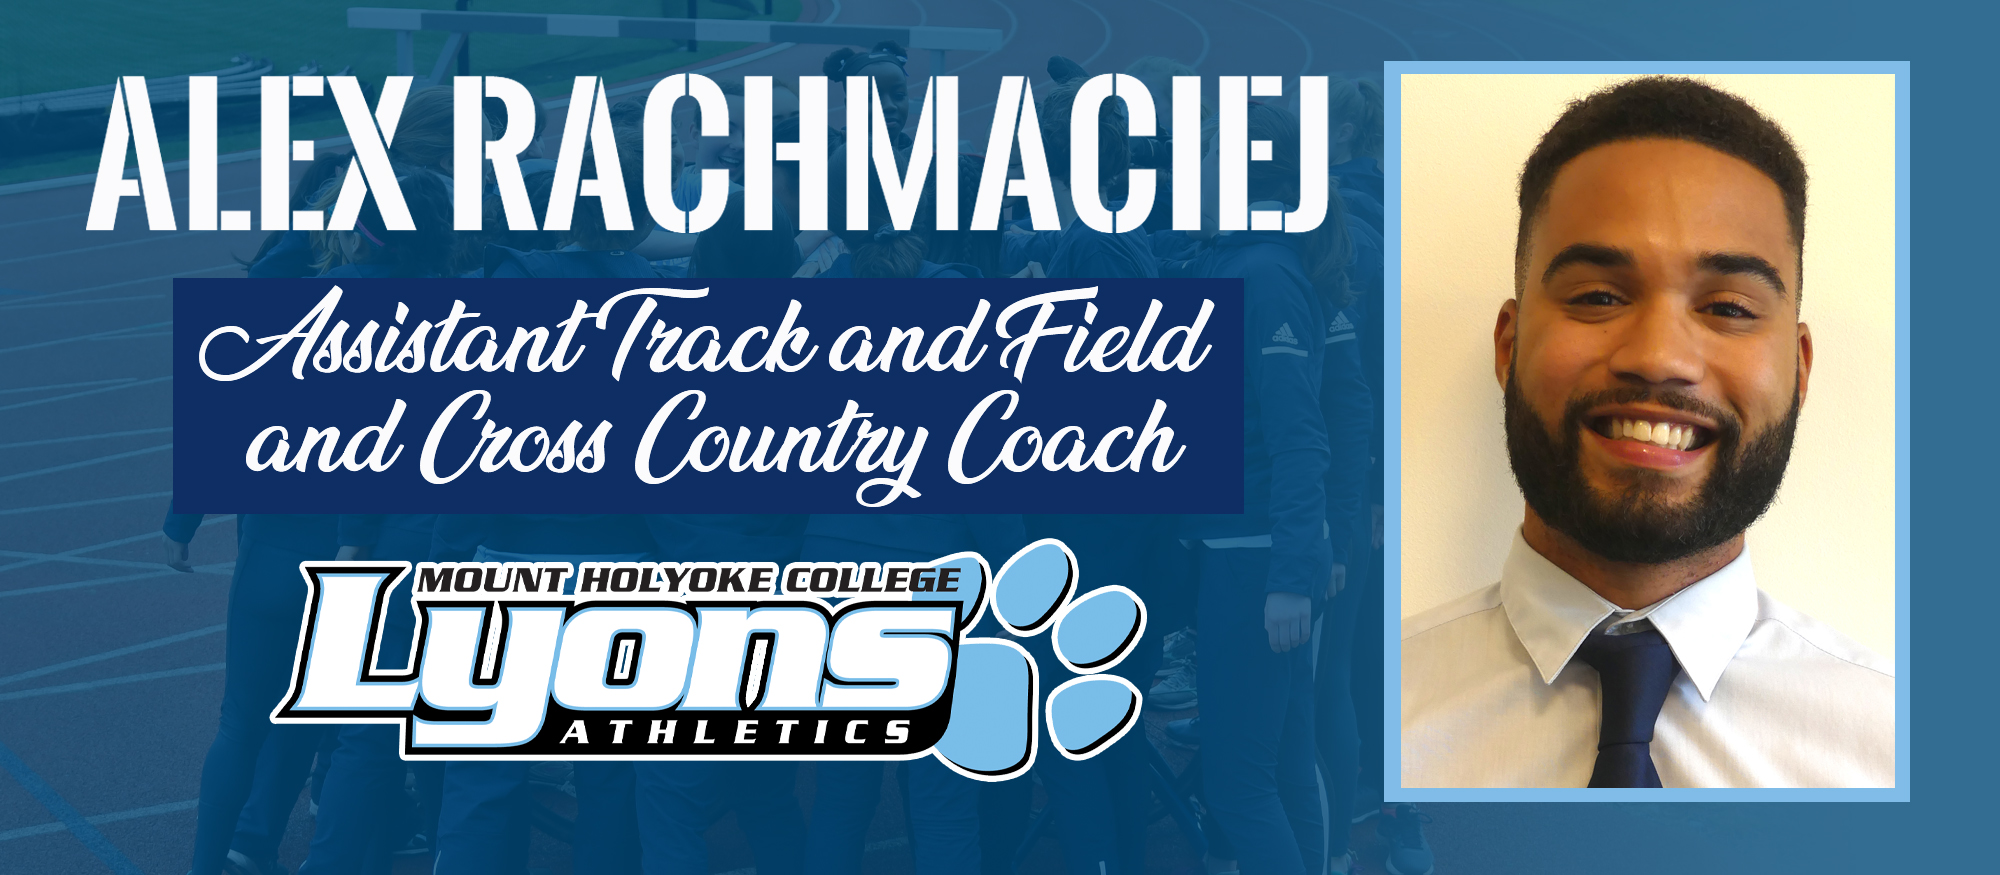 Alex Rachmaciej Named Assistant Track and Field and Cross Country Coach at Mount Holyoke College